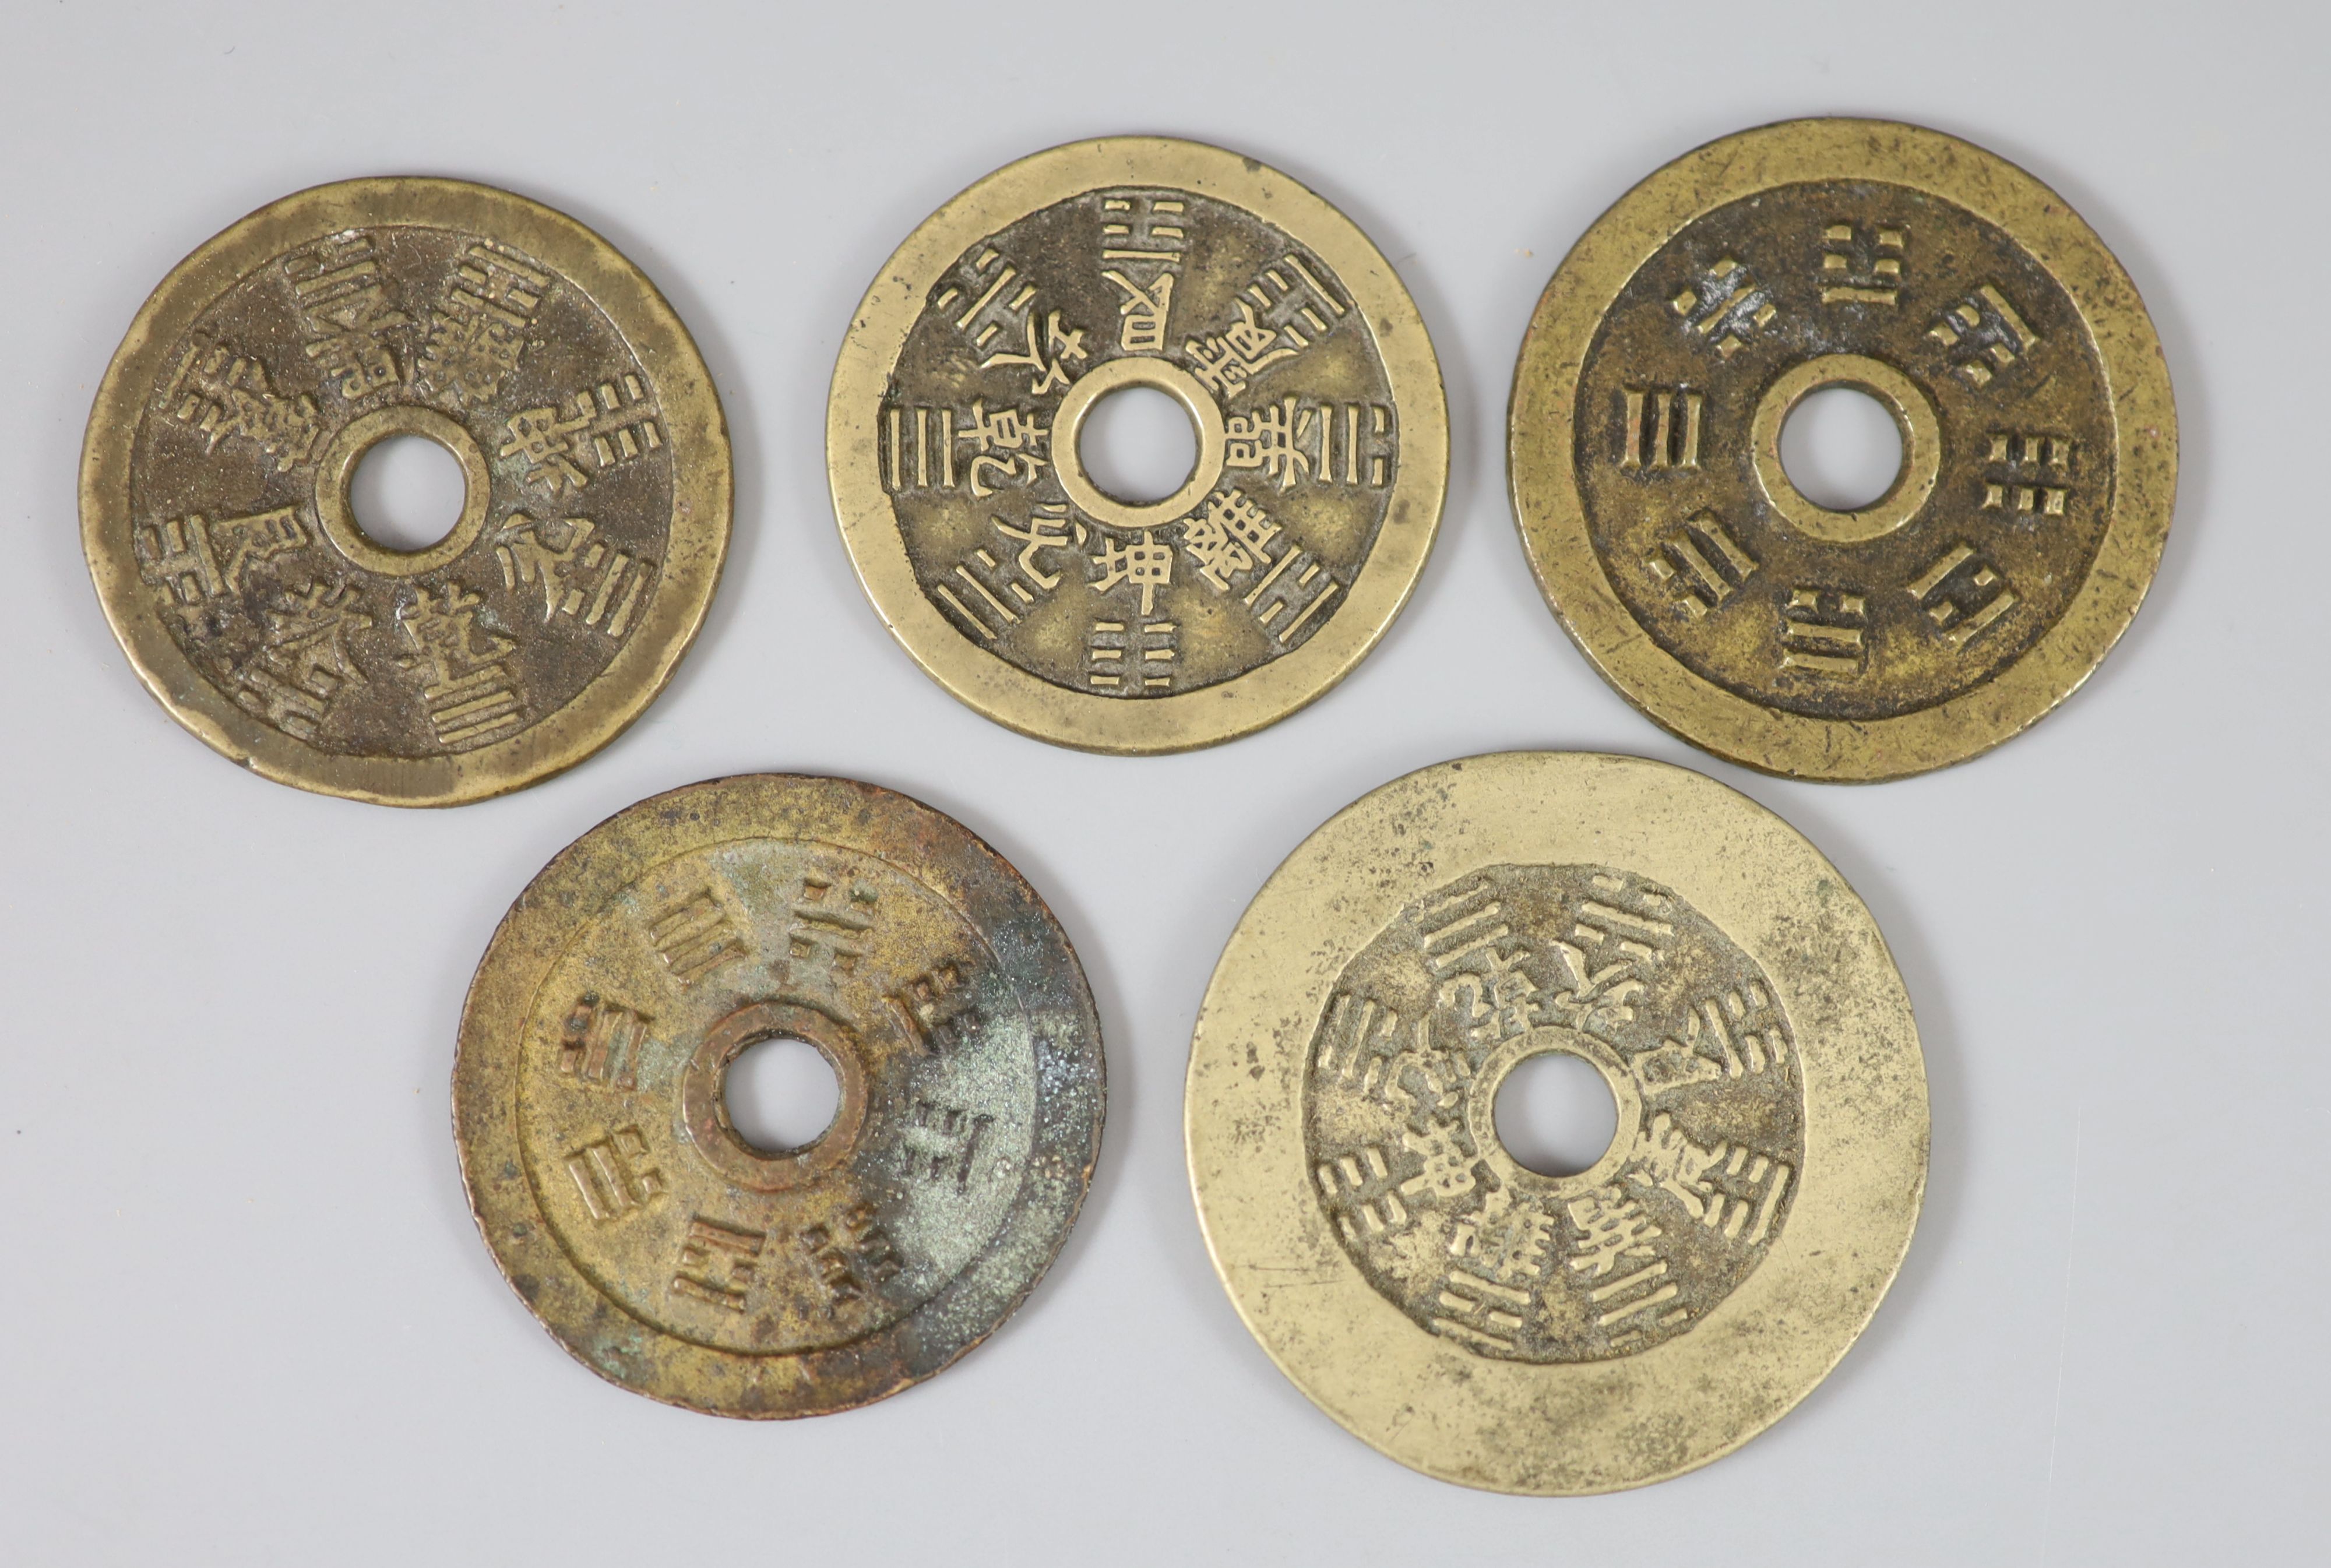 China, 5 bronze zodiac charms or amulets, Qing dynasty,